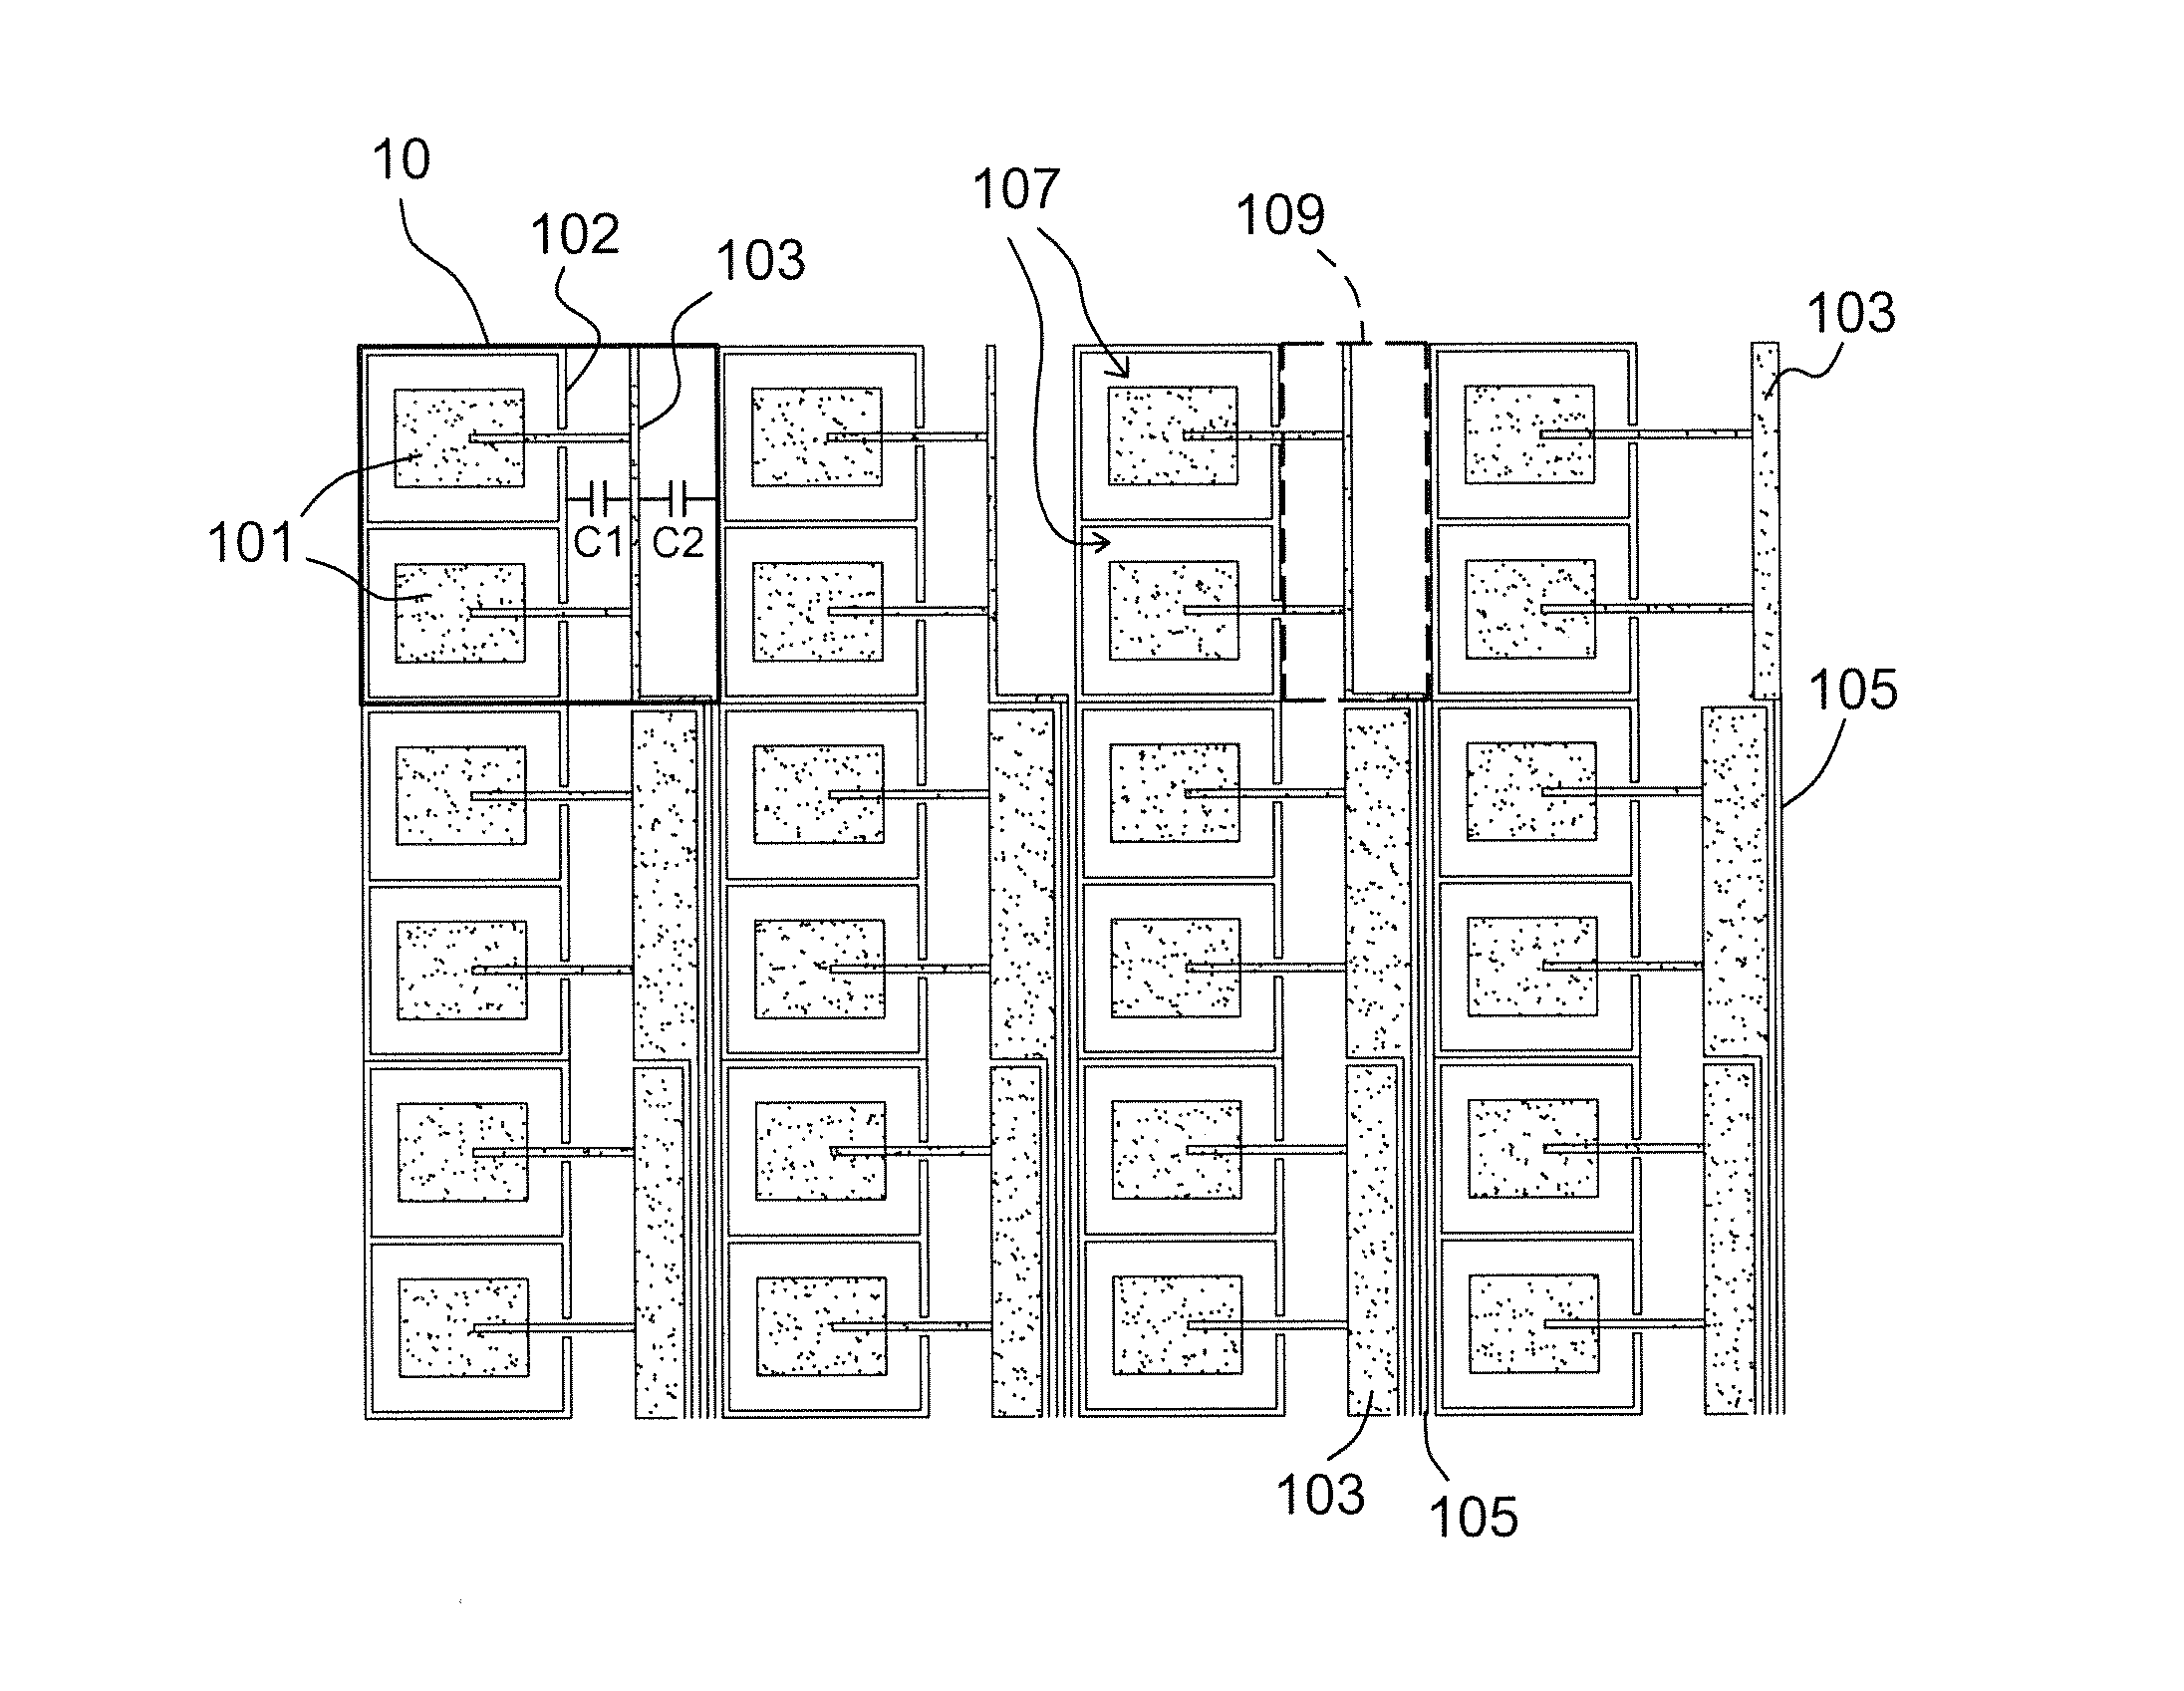 Single-layer capacitive touch sensor